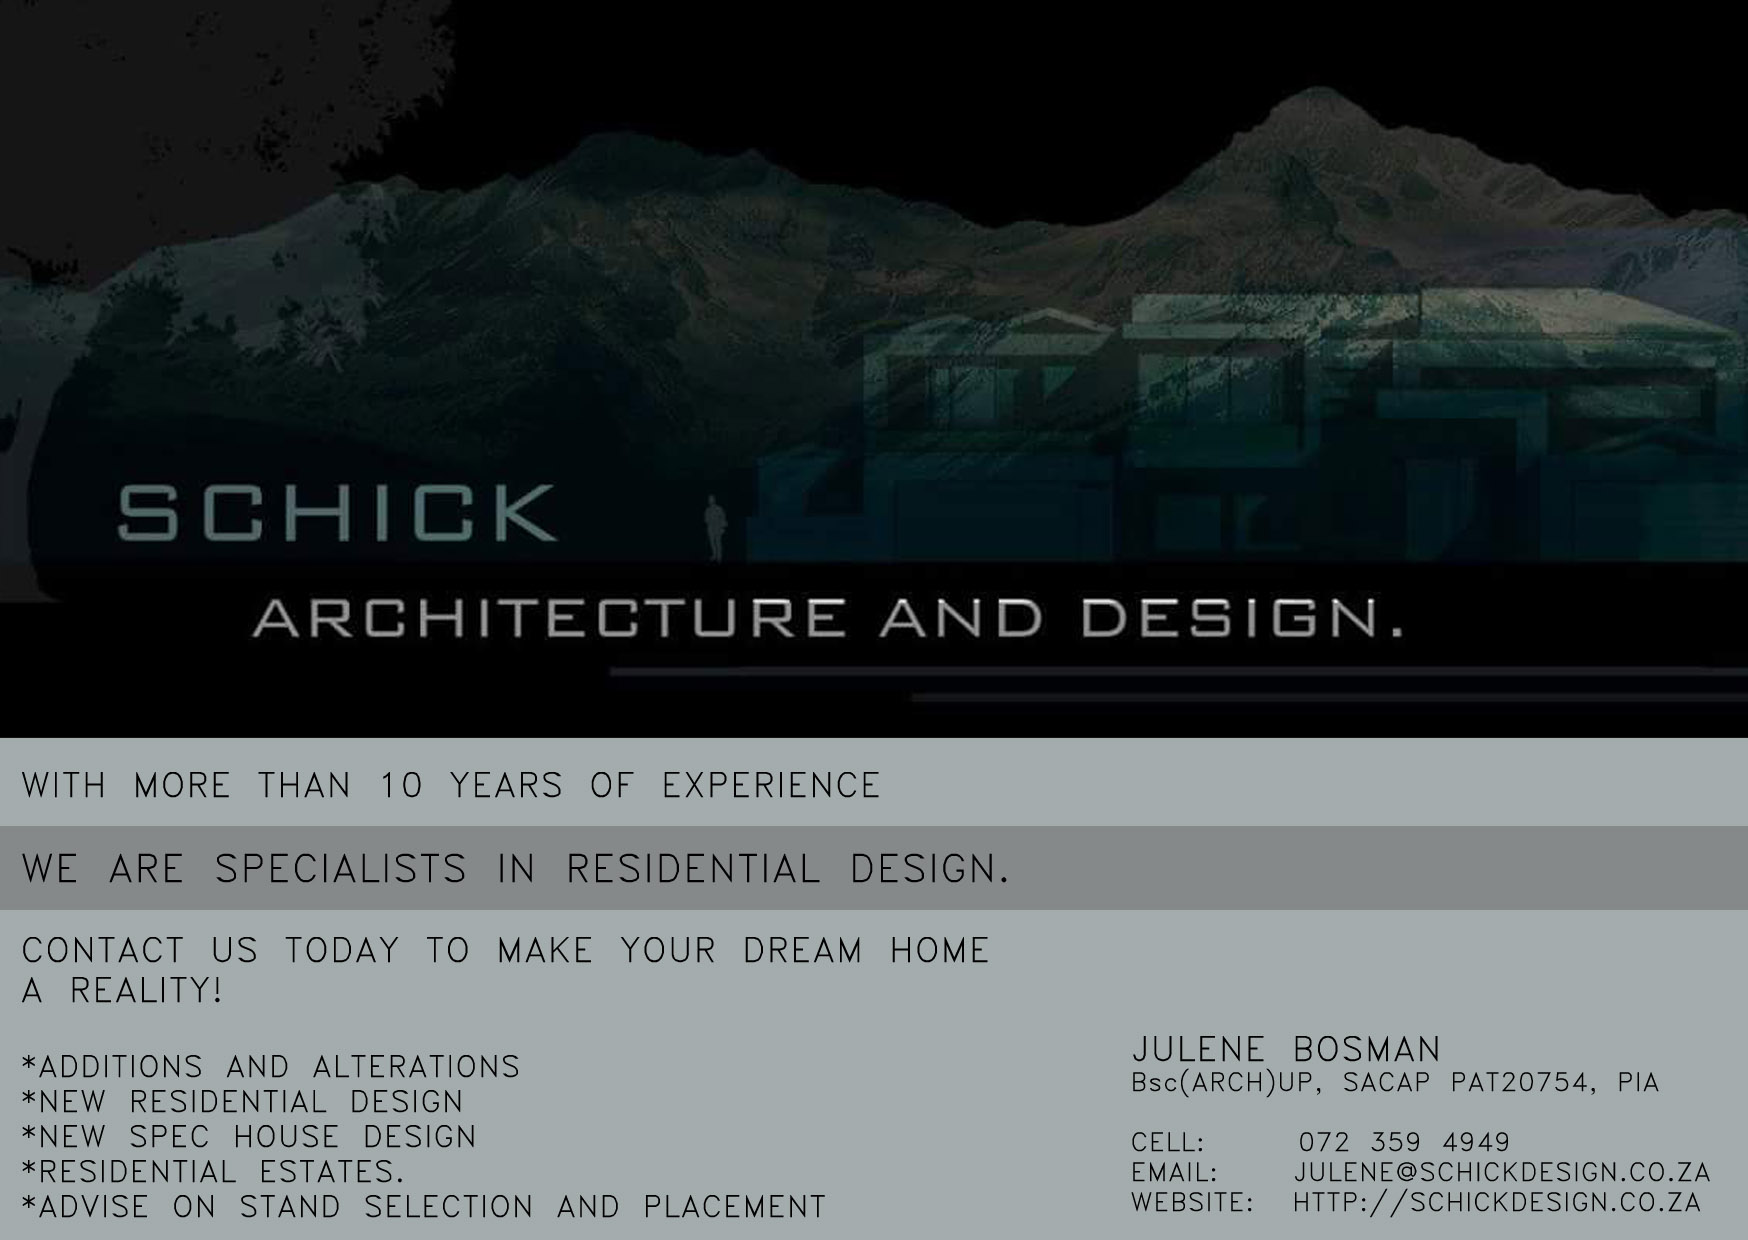 Schick Architecture and Design
With more than 10 years of experience
